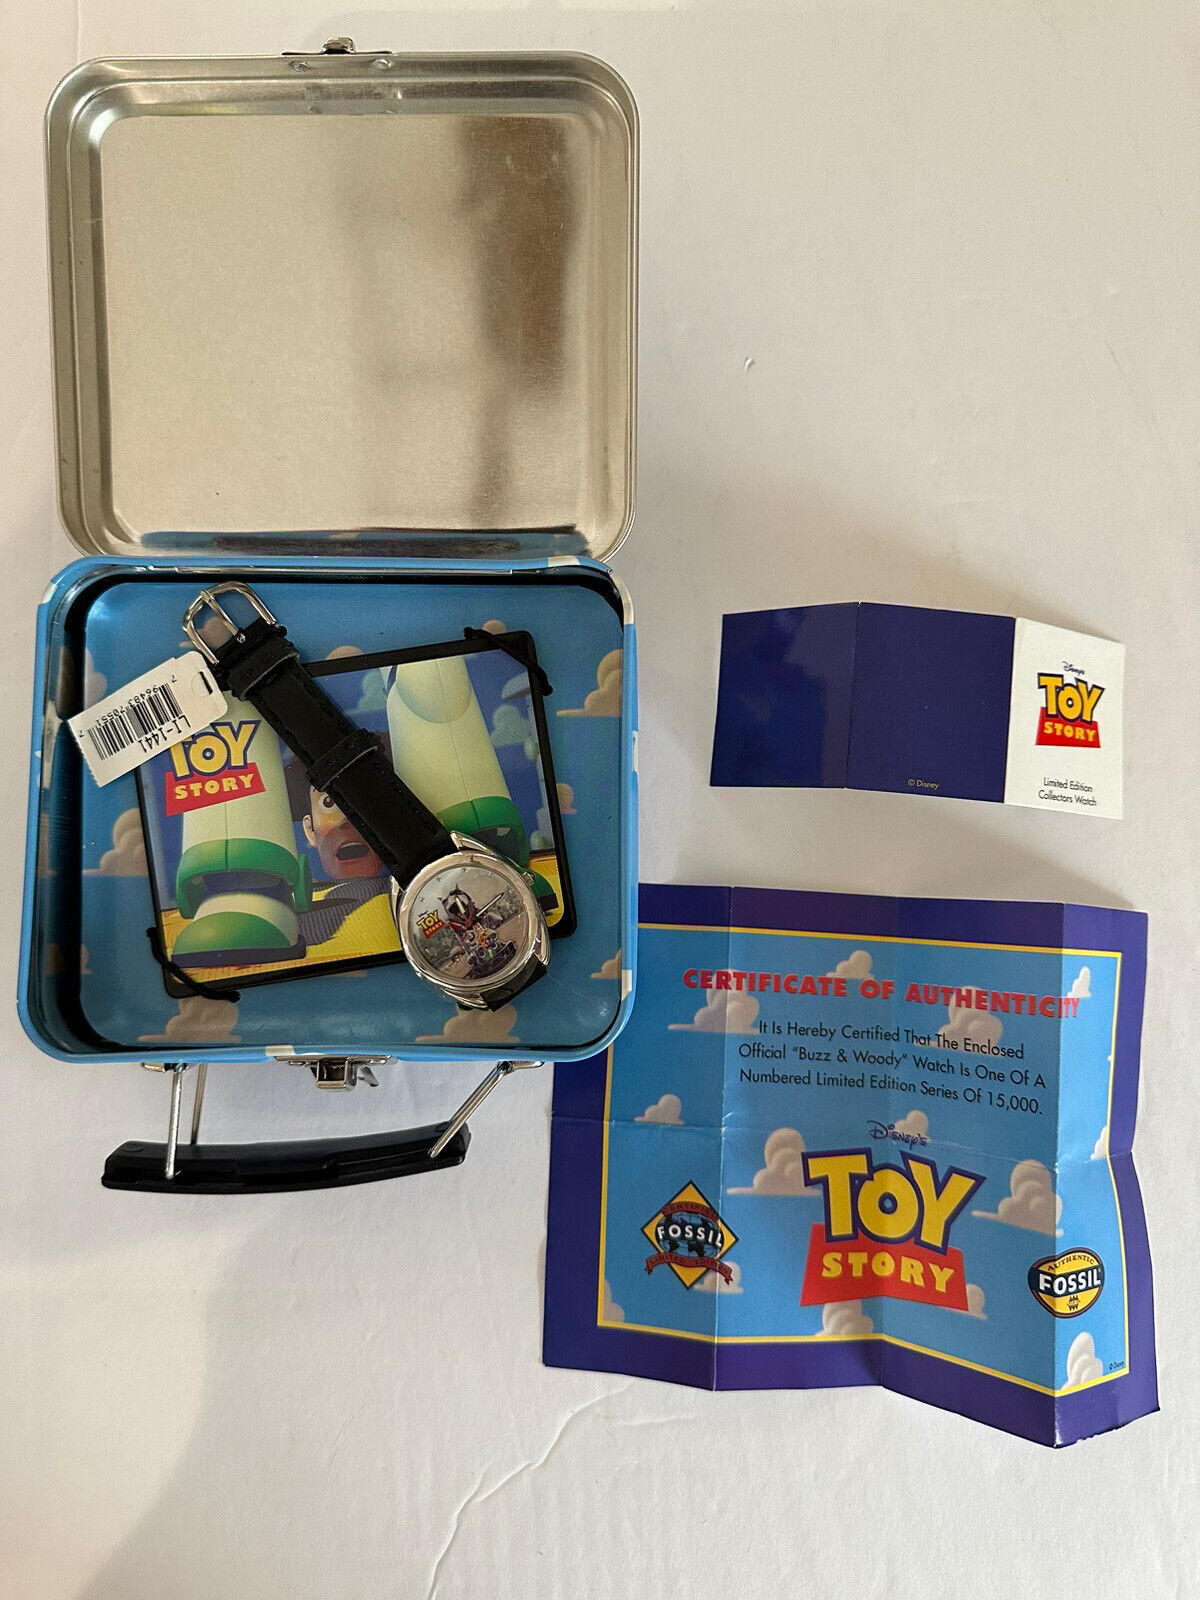 NEW, NMINT, DISNEY TOY STORY FOSSIL Ltd. Edition Collector Watch 10,004/15,000.